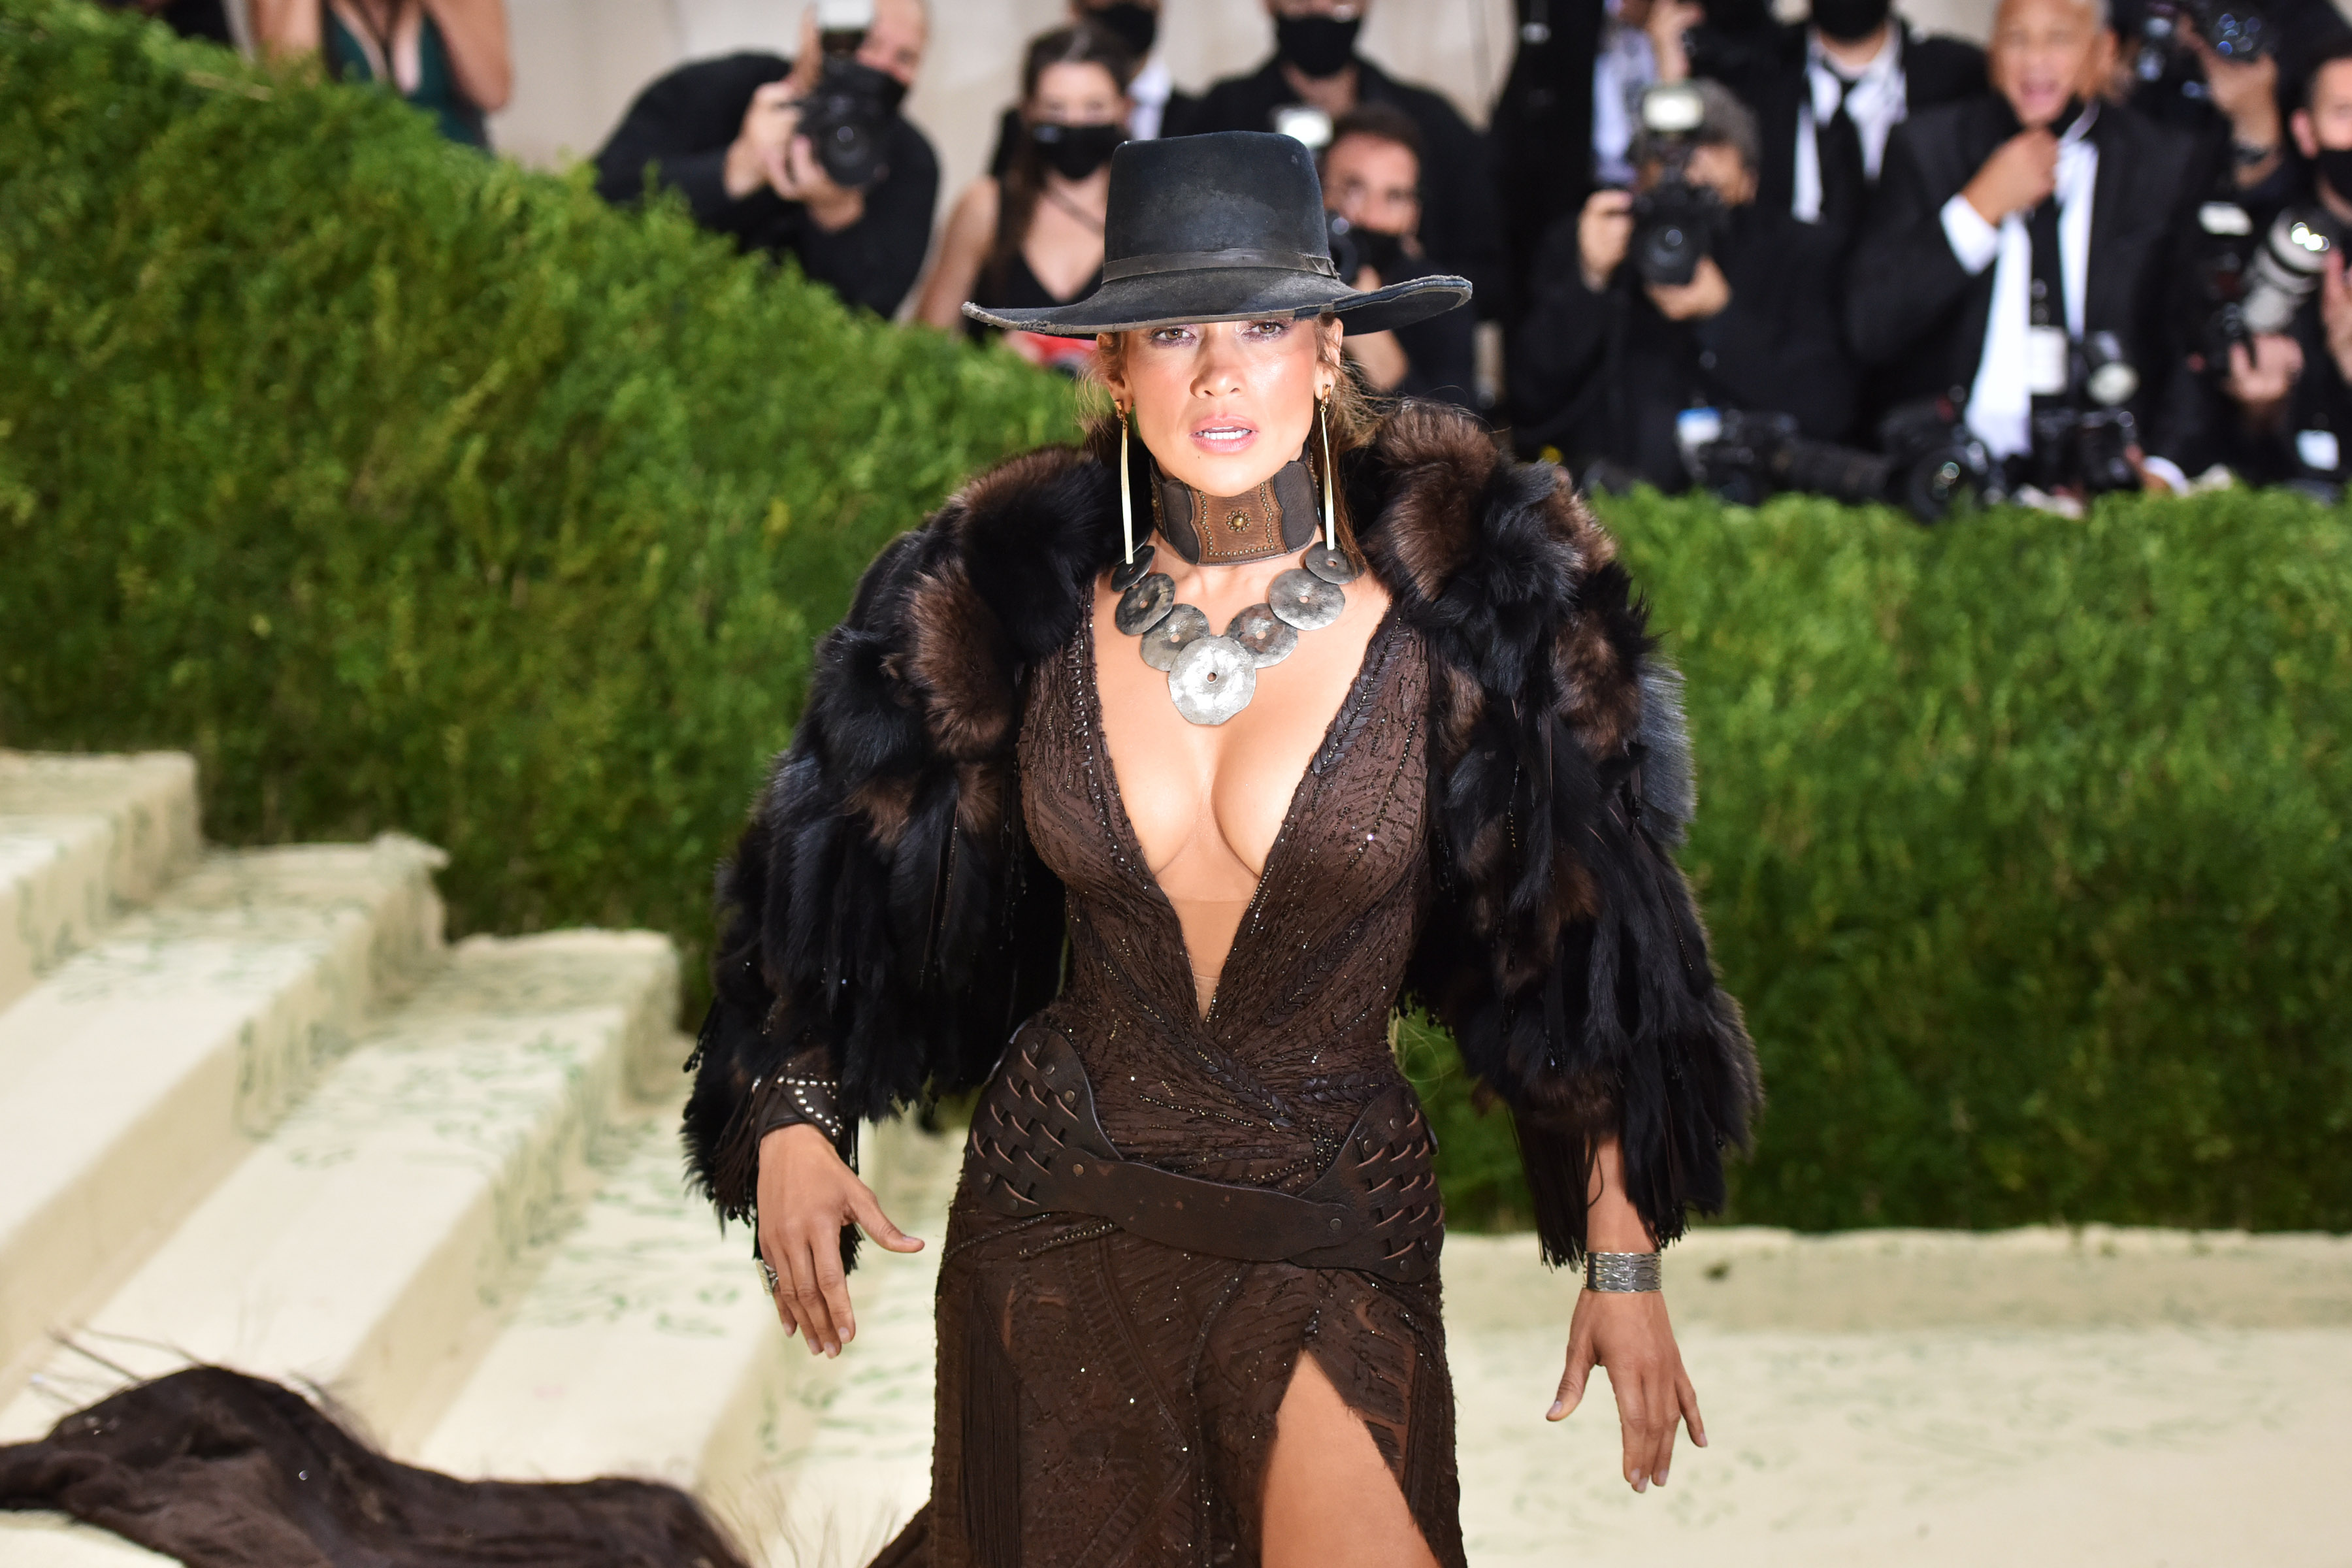 Jennifer Lopez poses in a black hat and tight, brown dress